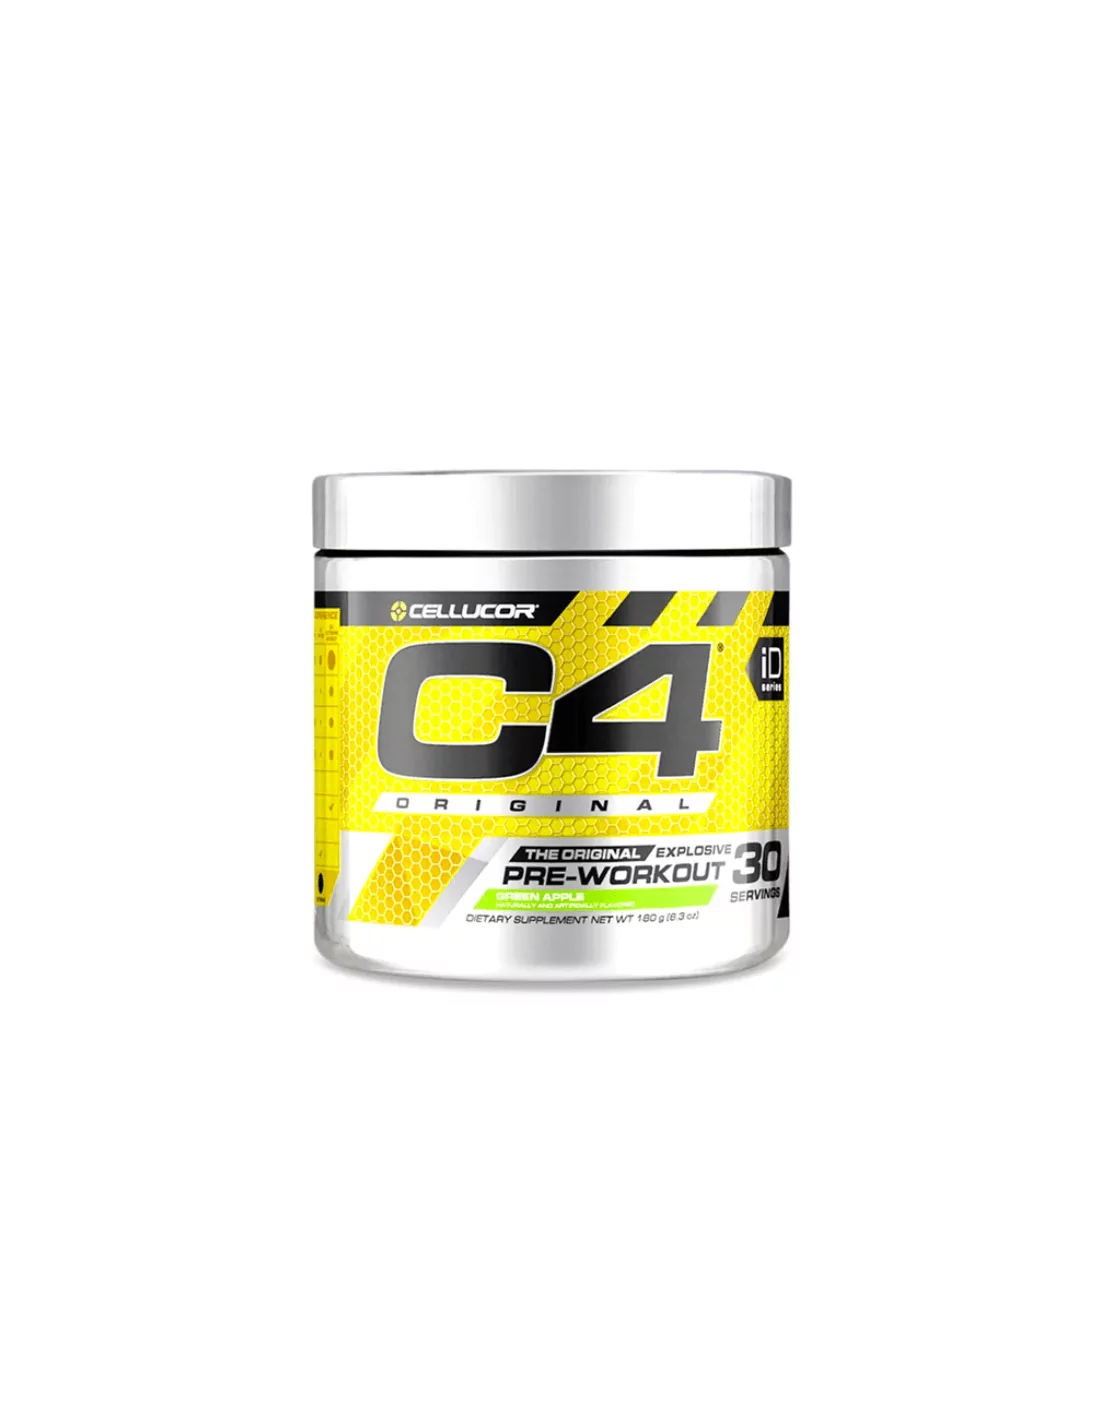 Buy Cellucor C4 Pre-workout Booster - 390g Online